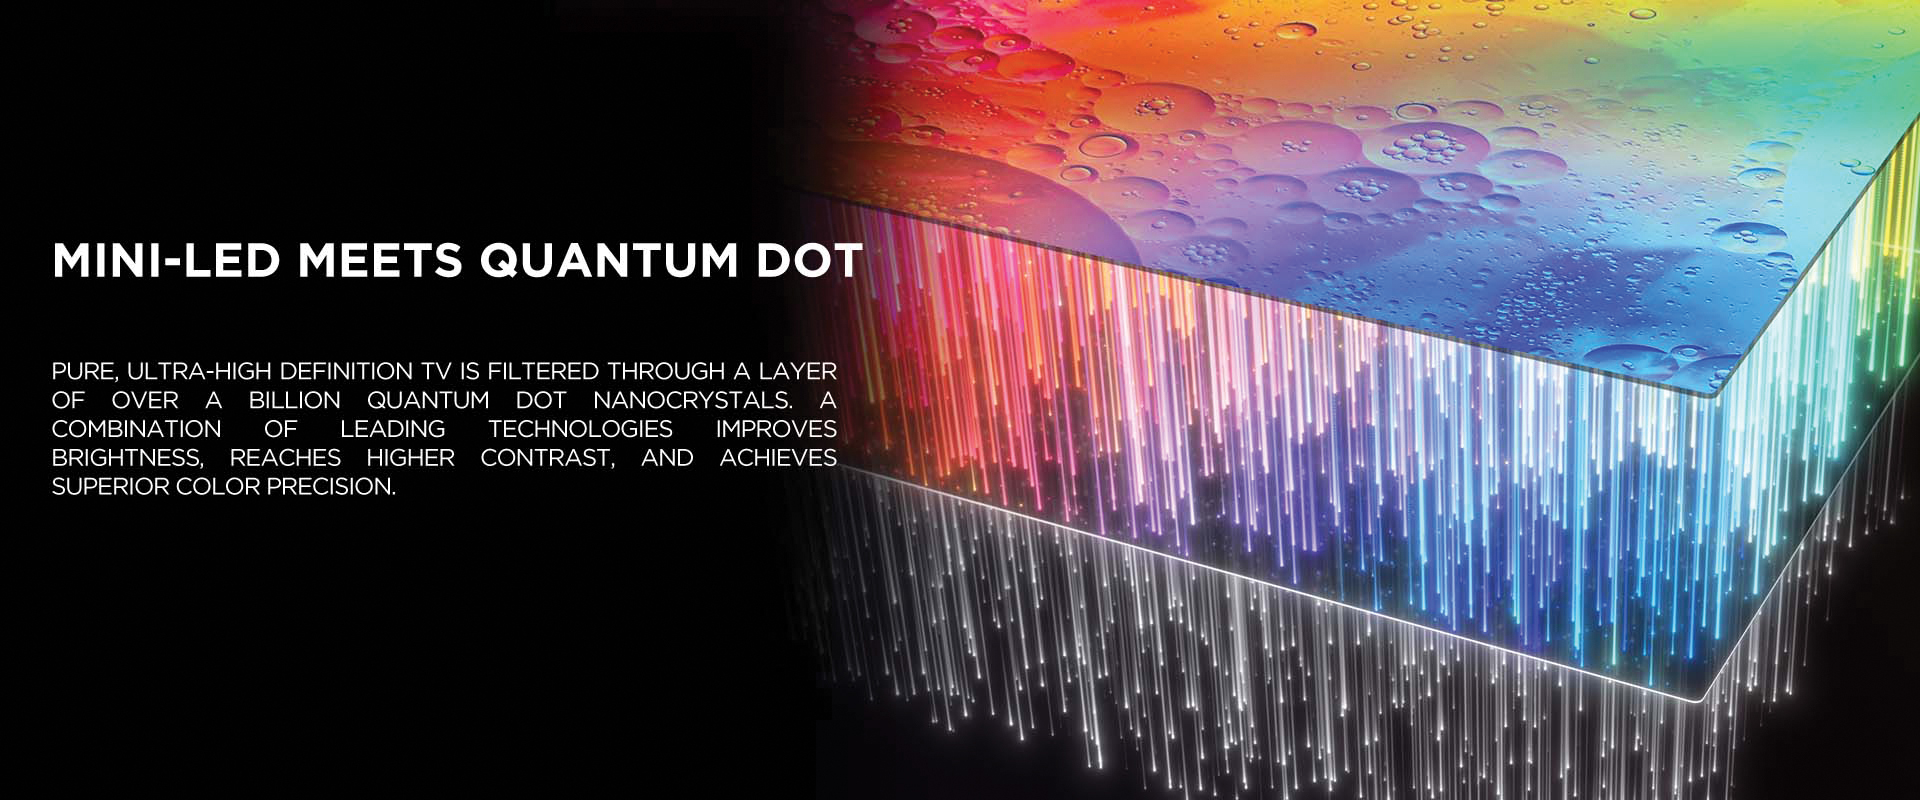 MINI-LED MEETS QUANTUM DOT - Pure, ultra-high definition TV is filtered through a layer of over a billion Quantum Dot nanocrystals. A combination of leading technologies improves brightness, reaches higher contrast, and achieves superior color precision.